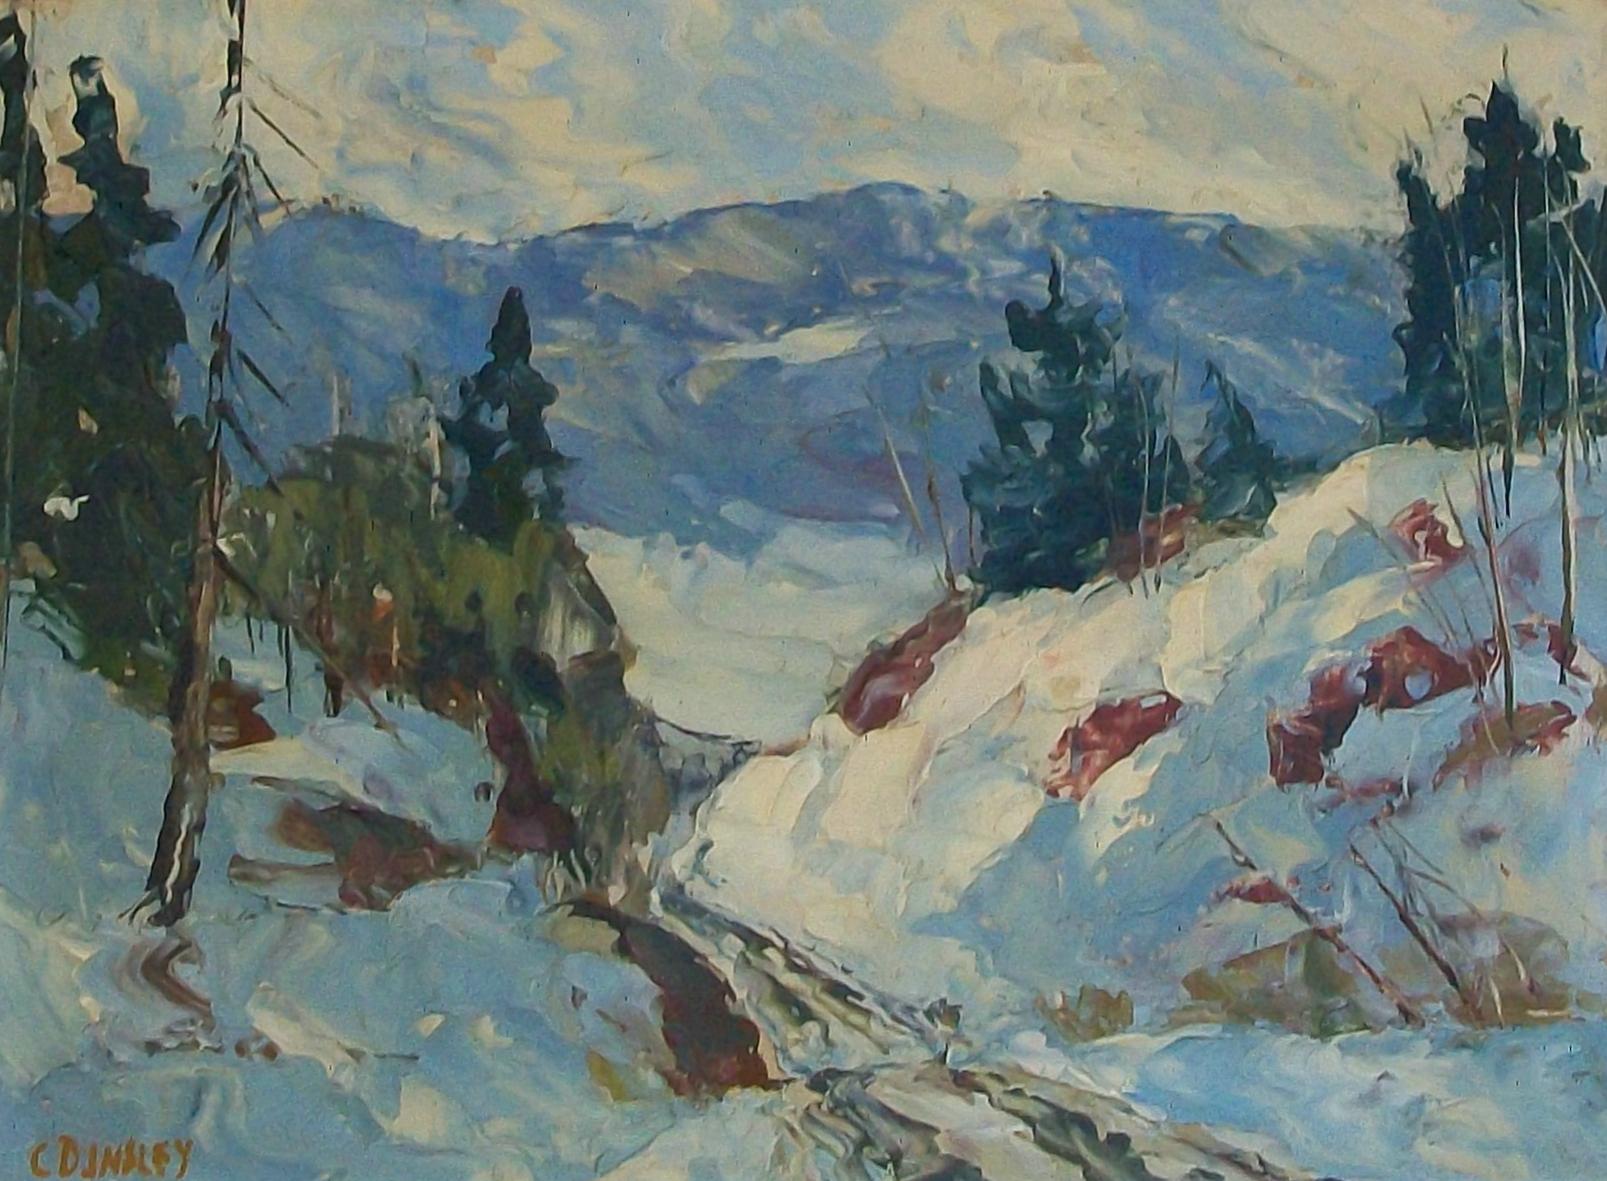 Mid-Century Modern C. D. INSLEY - 'Late Afternoon Snow' - Framed Oil Painting - Canada - Circa 1960 For Sale